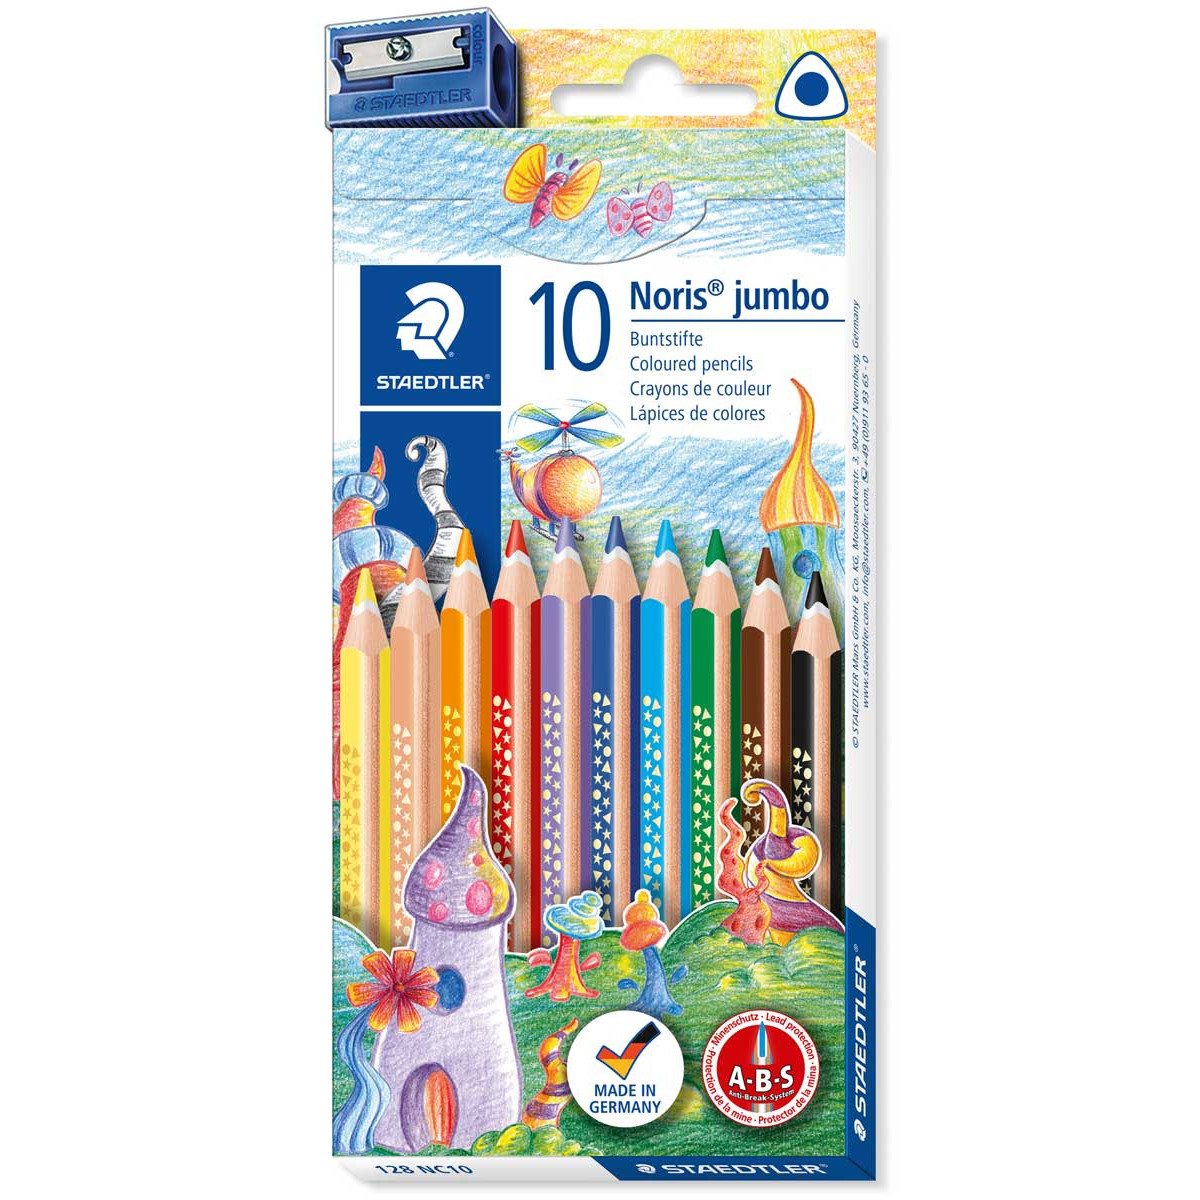 Staedtler Noris Jumbo Triplus Colouring Pencils - Assorted Colours (Pack of 10)